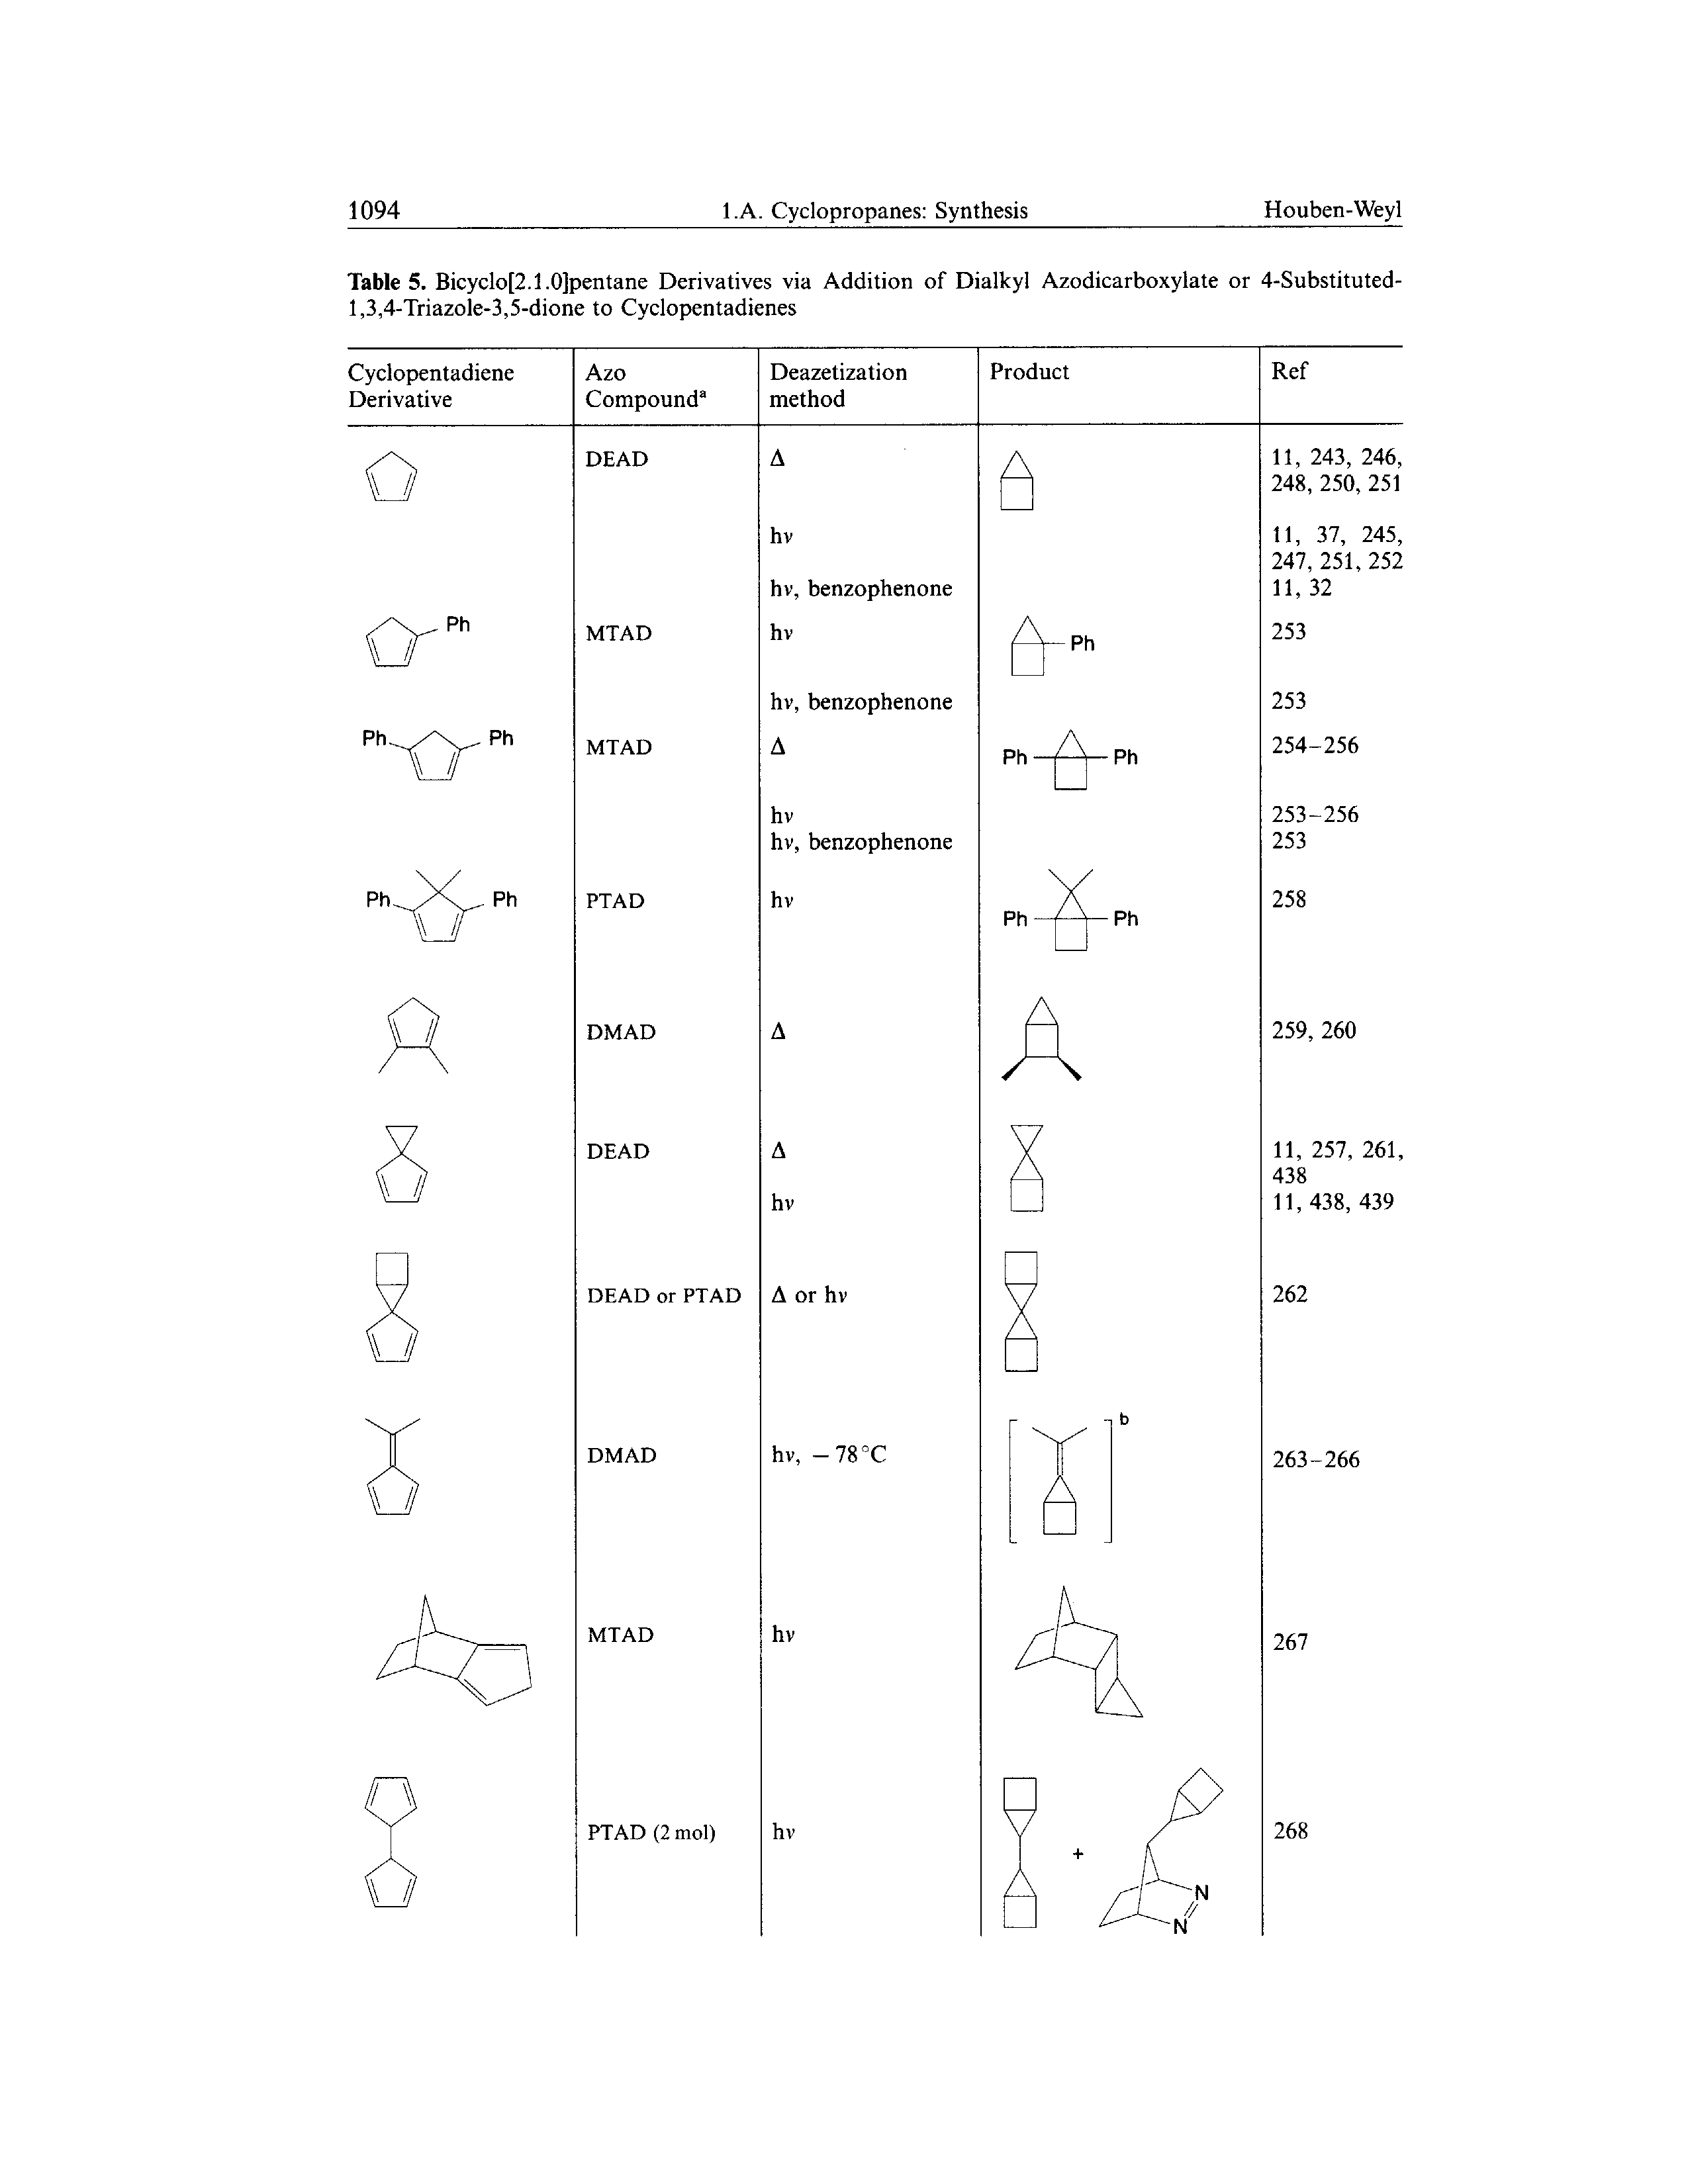 Table 5. Bicyclo[2.1.0]pentane Derivatives via Addition of Dialkyl Azodicarboxylate or 4-Substituted-1,3,4-Triazole-3,5-dione to Cyclopentadienes...